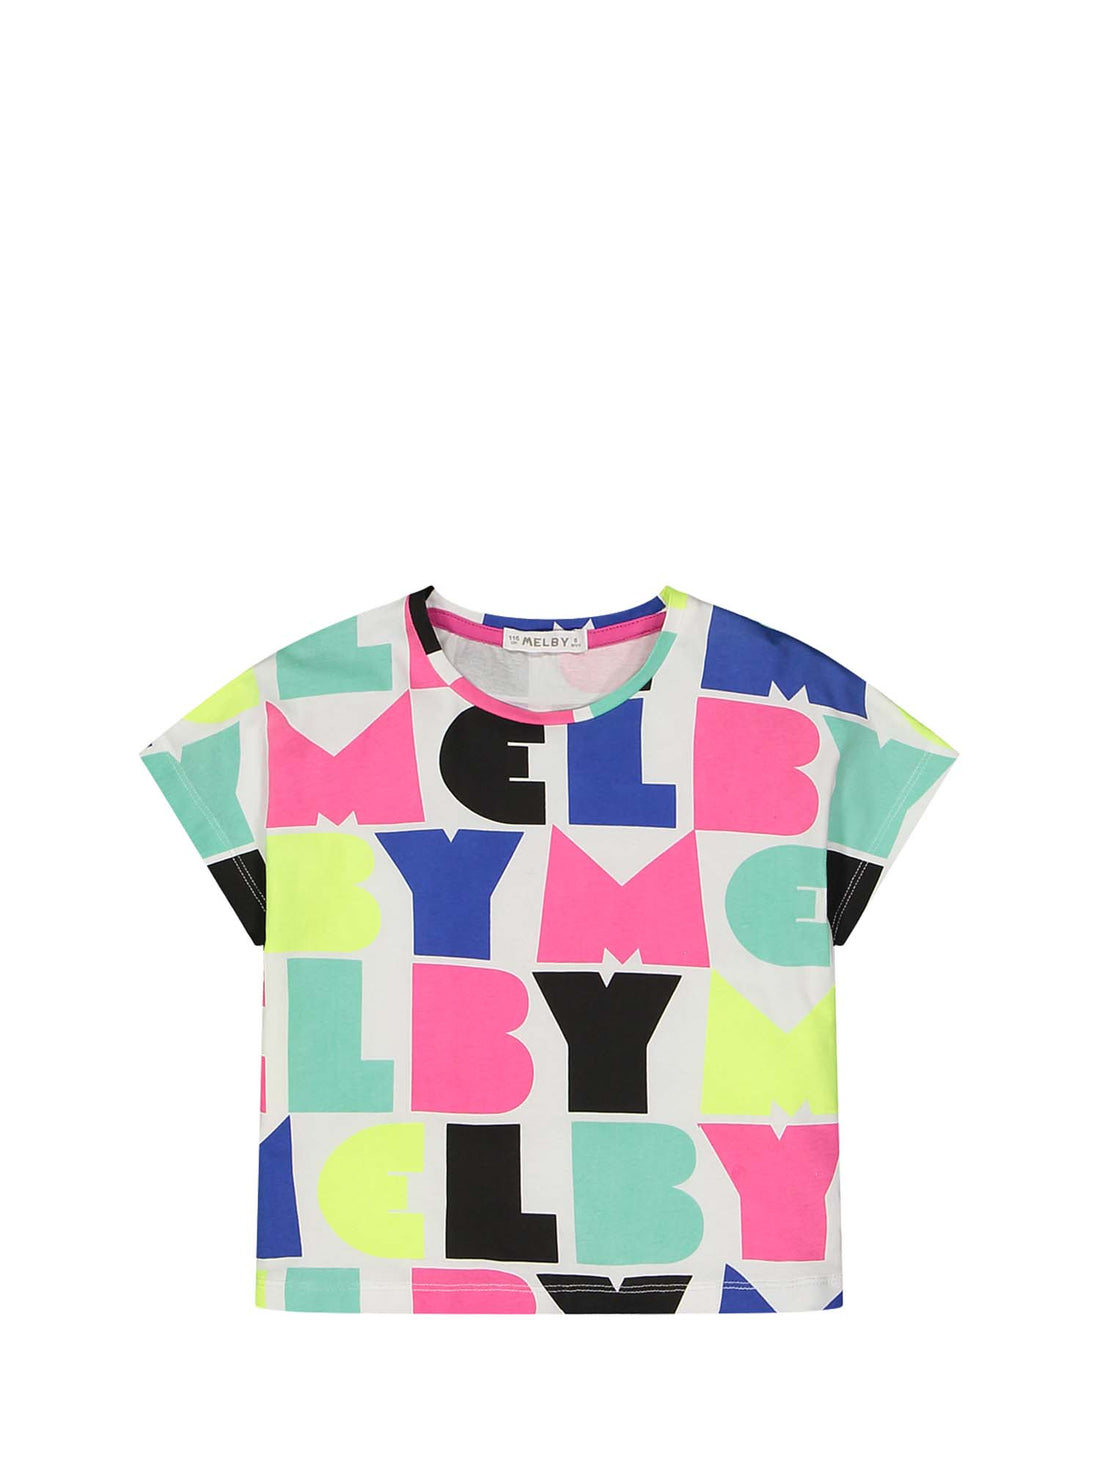 T-shirt Rosa Melby